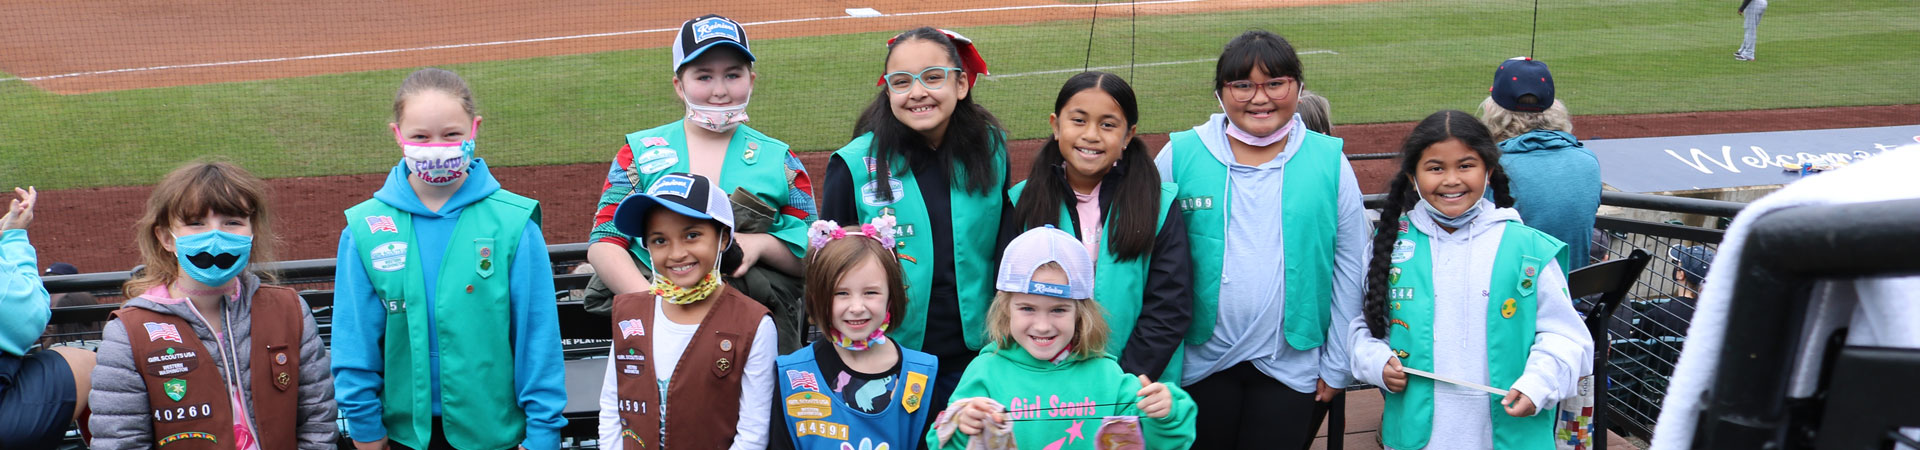  A group of Girl Scouts wearing brown, green, and blue vests poses outside in front of a baseball field. 